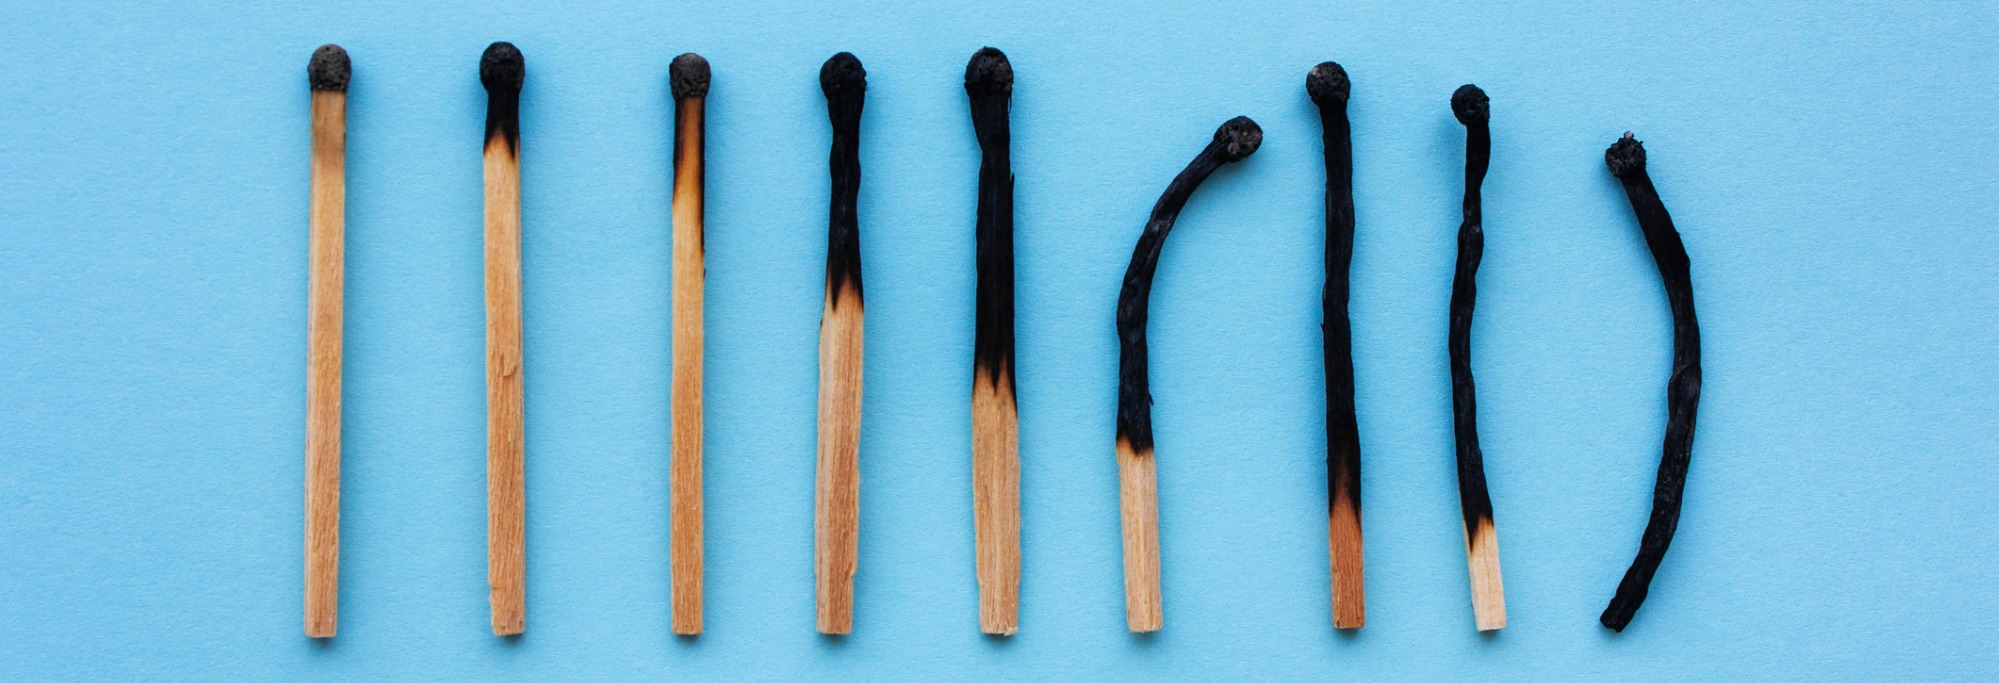 A series of matchsticks, progressively more burnt. Image depicts stress and burnout of managing a rental property. 